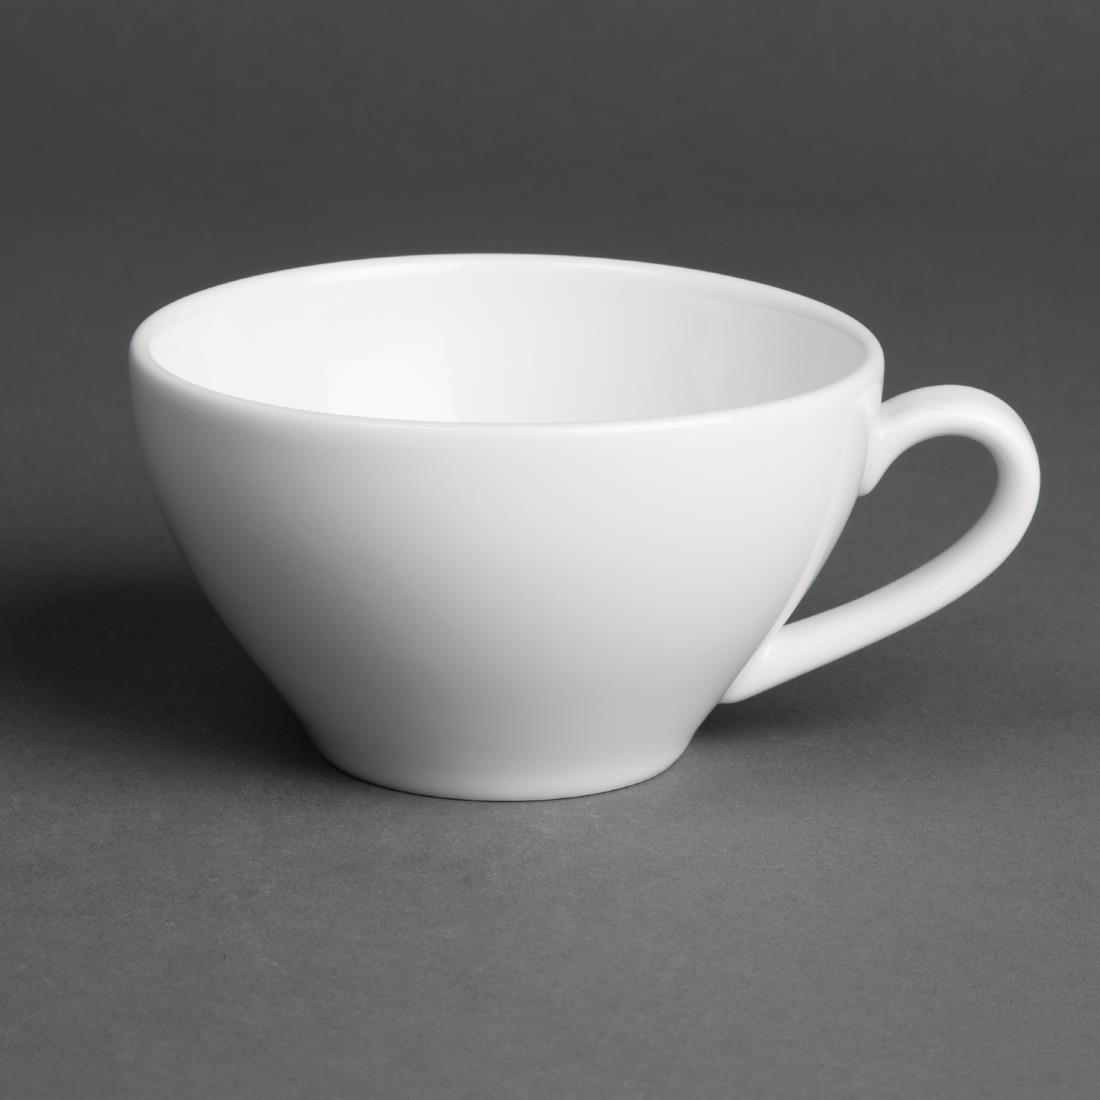 Royal Porcelain Classic White Tea Cups 230ml (Pack of 12) - CG028  - 1